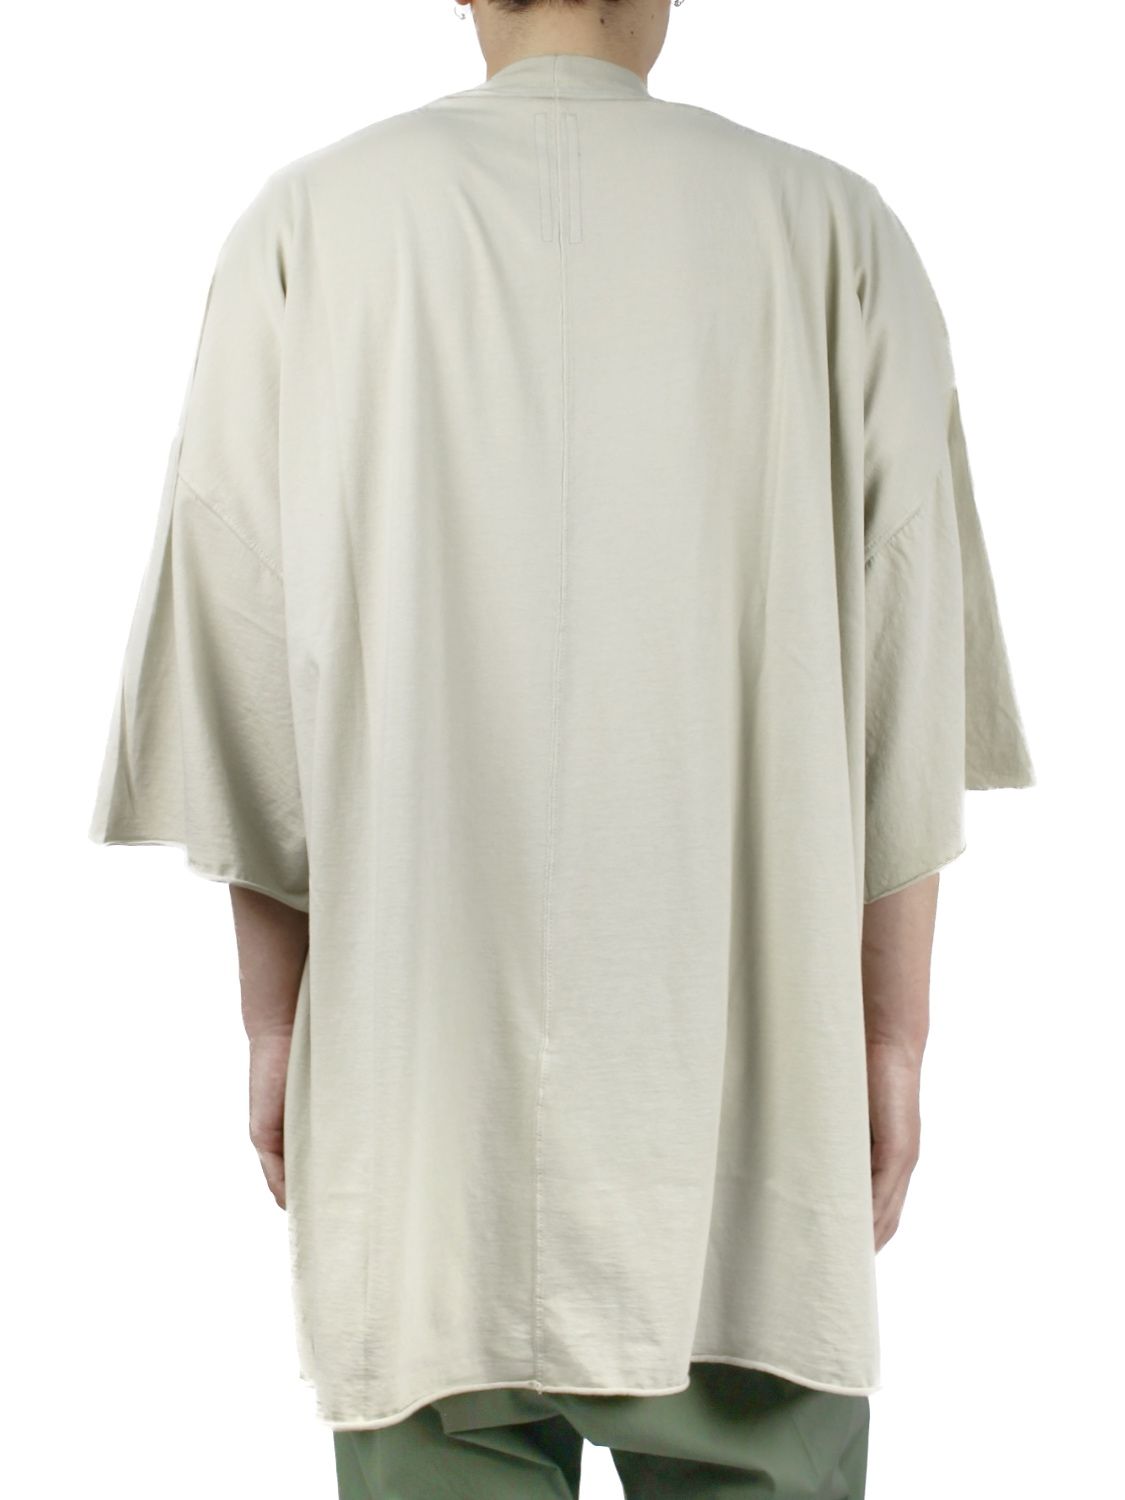 RICK OWENS - 【23SS】半袖 トミー スーパービッグ Tシャツ / TOMMY T